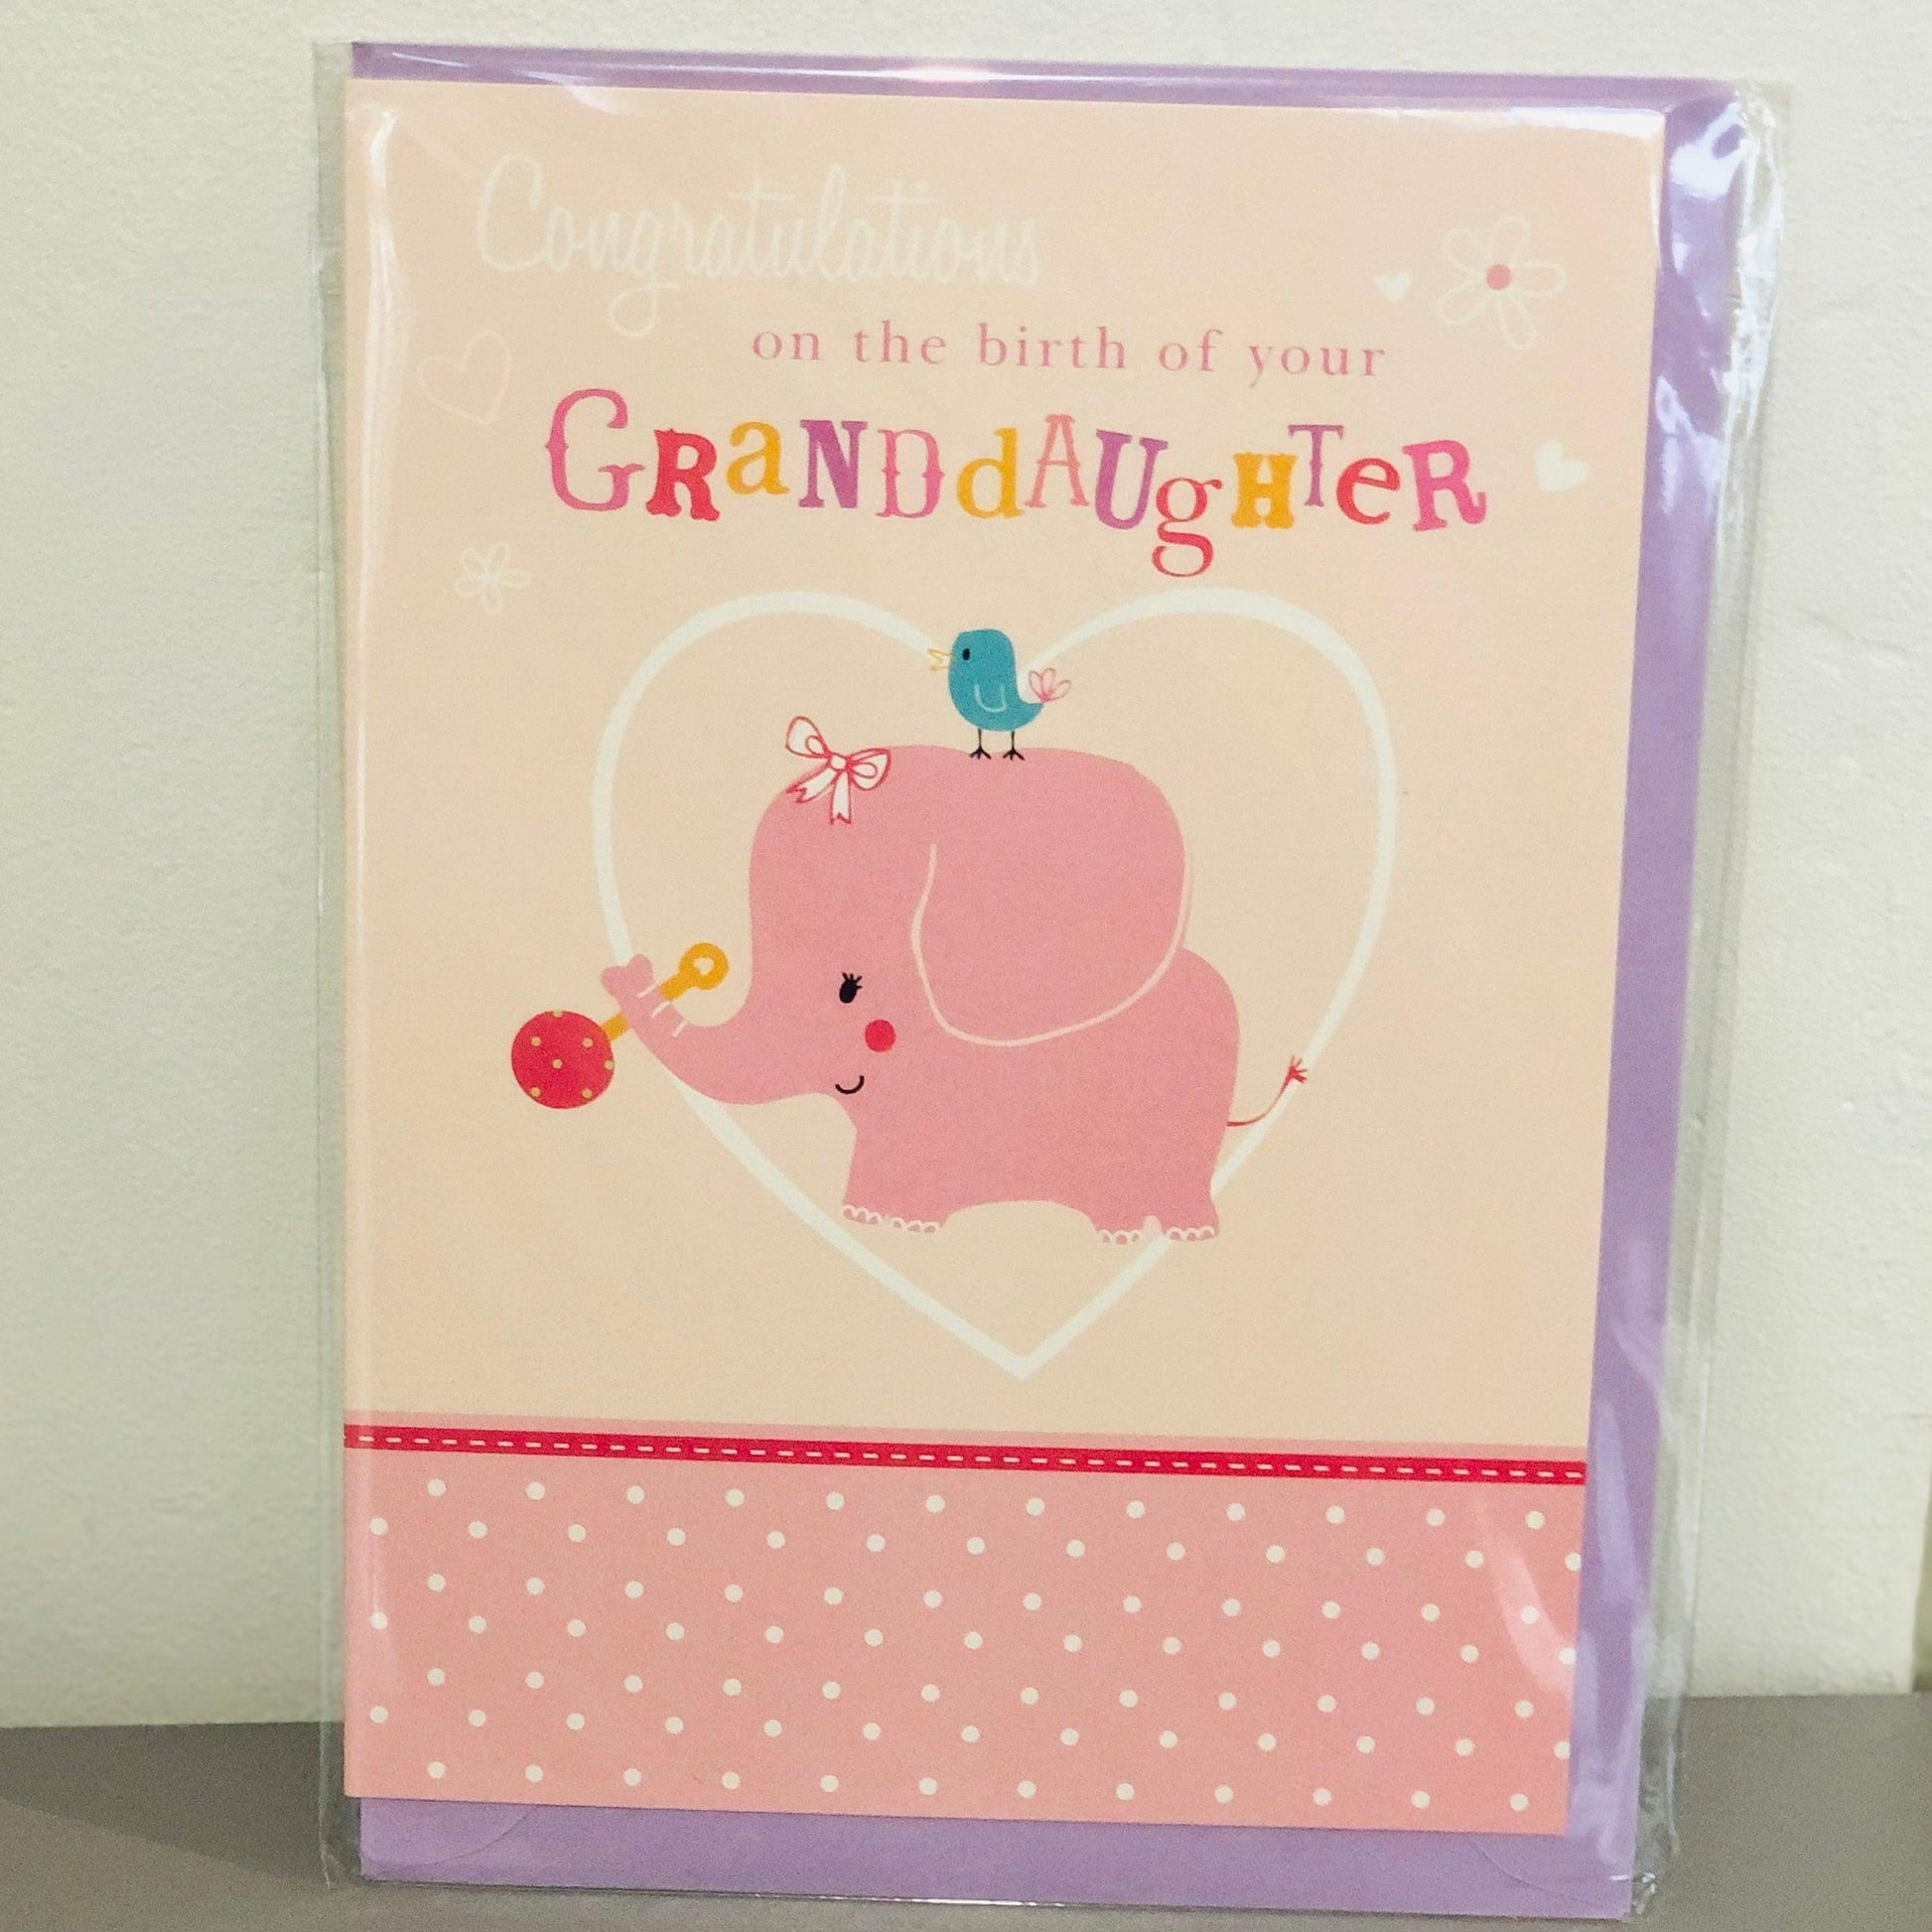 Granddaughter Congratulations Card | Oscar & Me | Baby & Children’s Clothing & Accessories